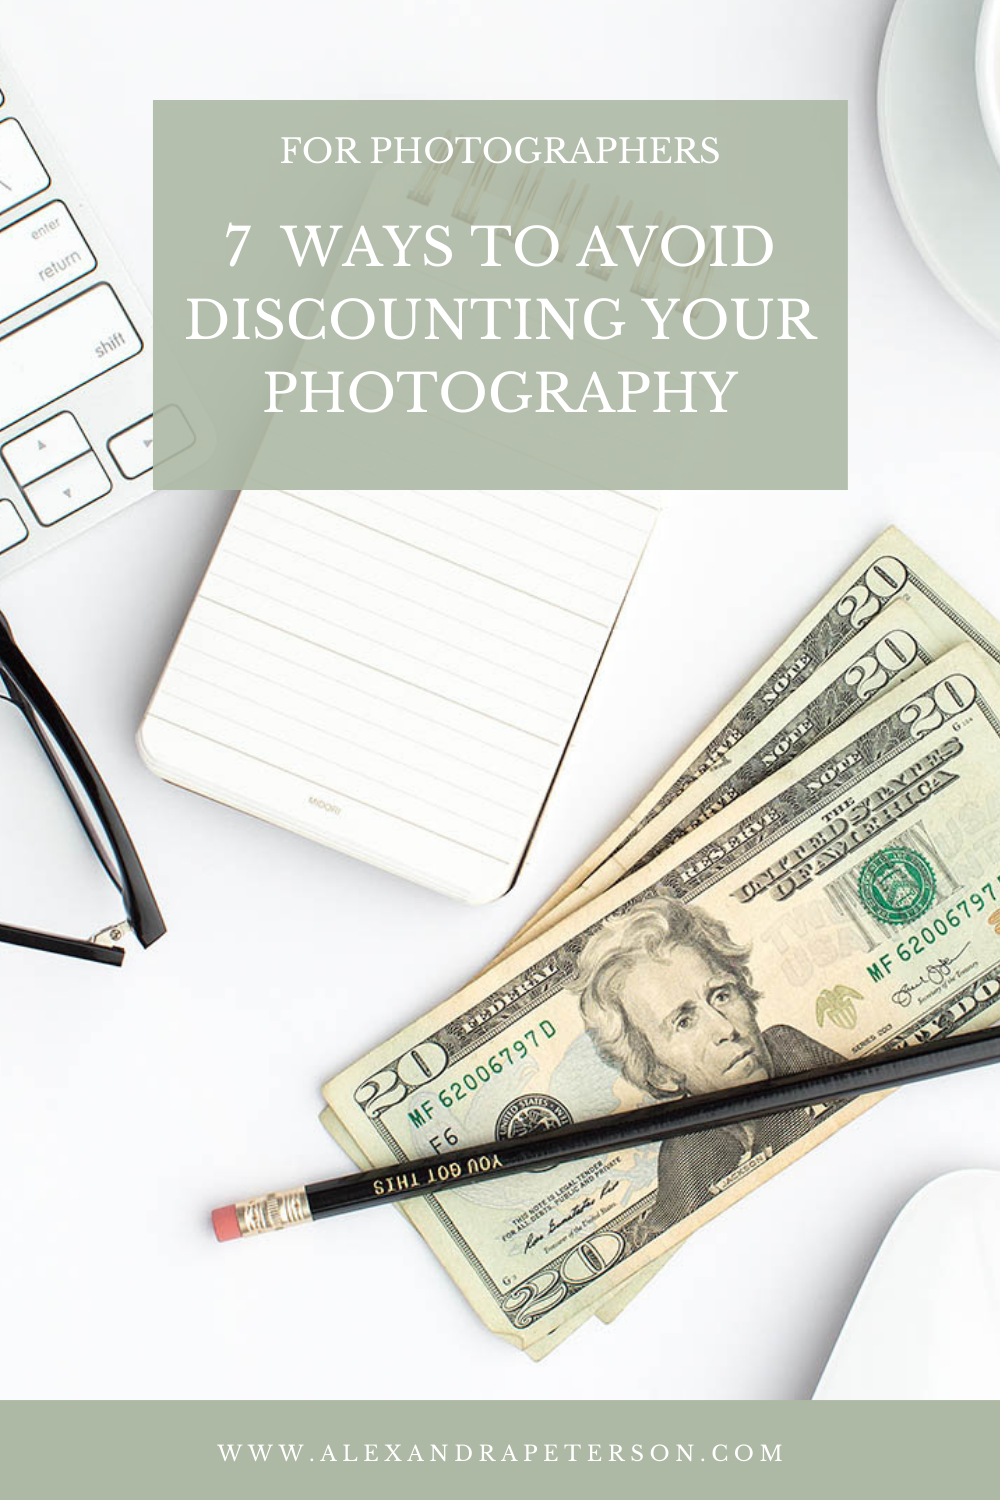 7 Ways to Avoid Discounting Your Photography